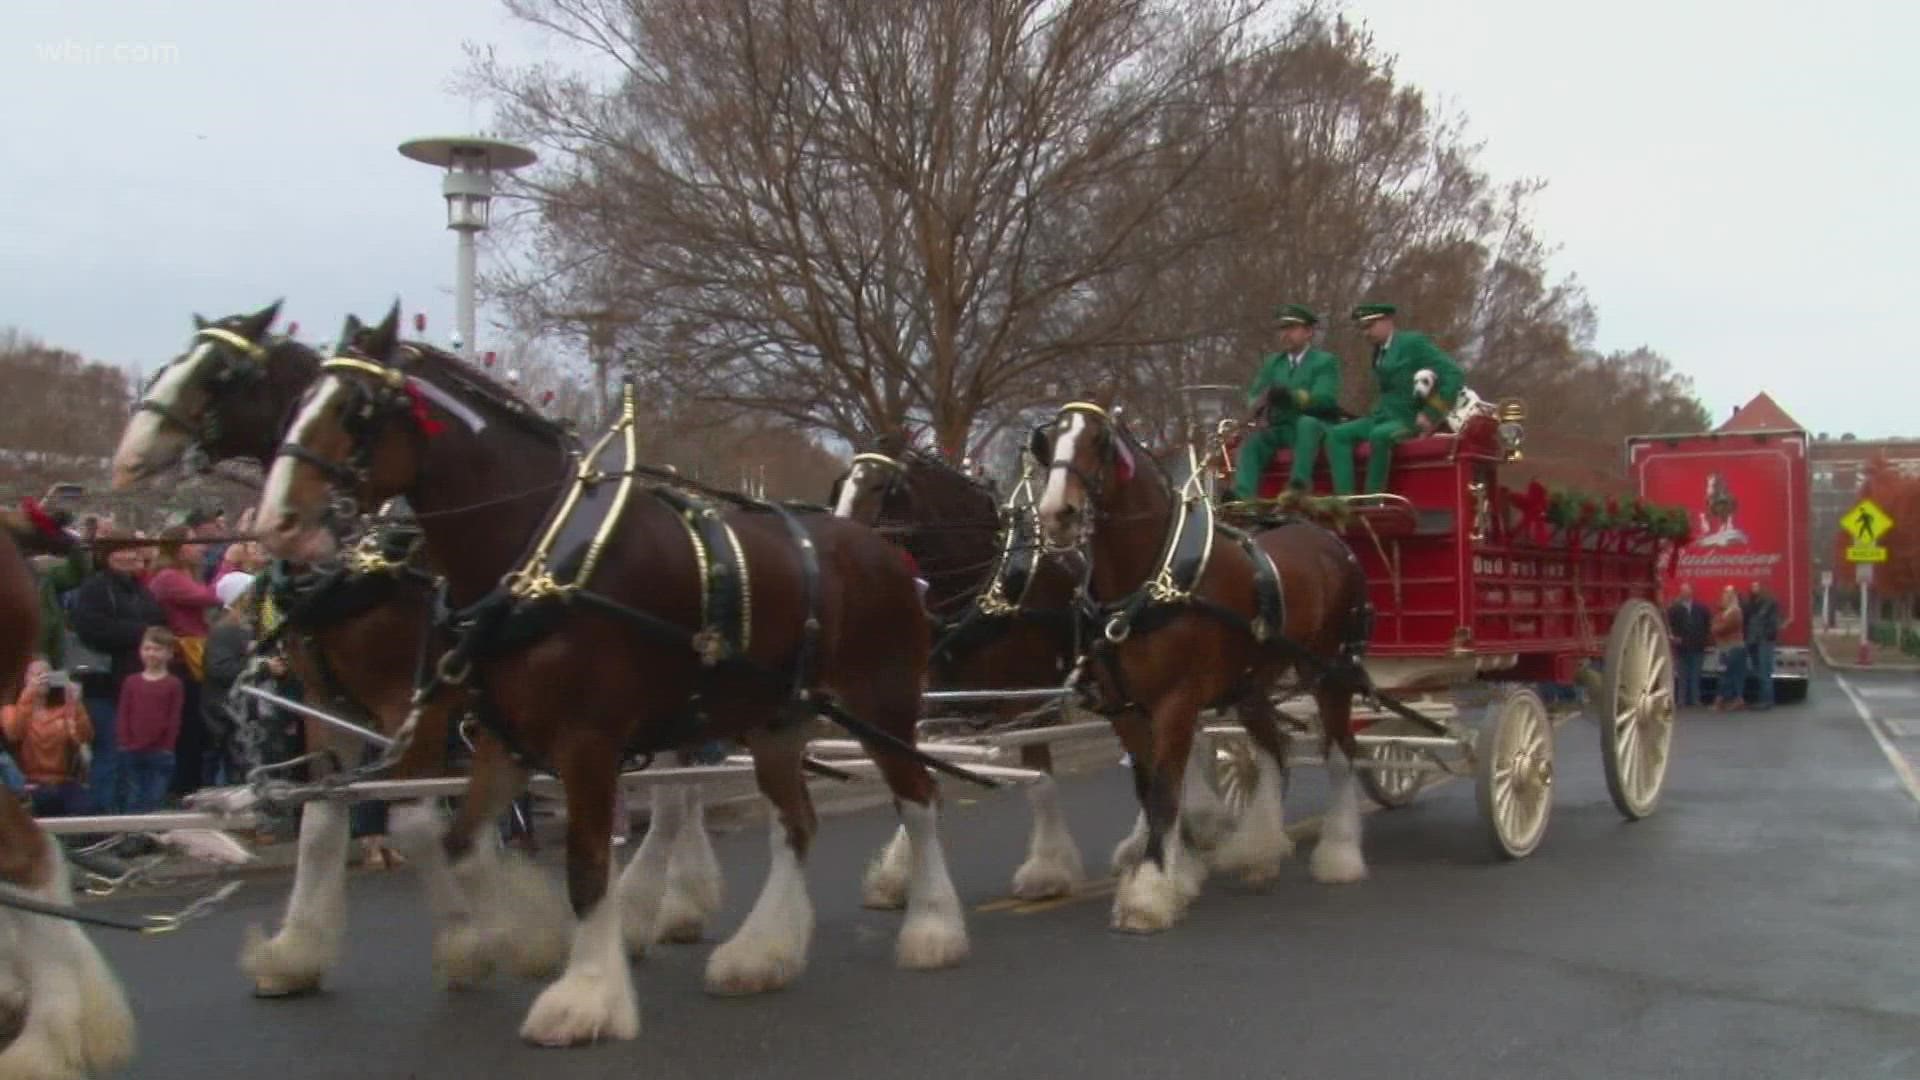 On Sunday afternoon, Visit Knoxville and the city invited the public to come see the Budweiser Clydesdales at World's Fair Park!